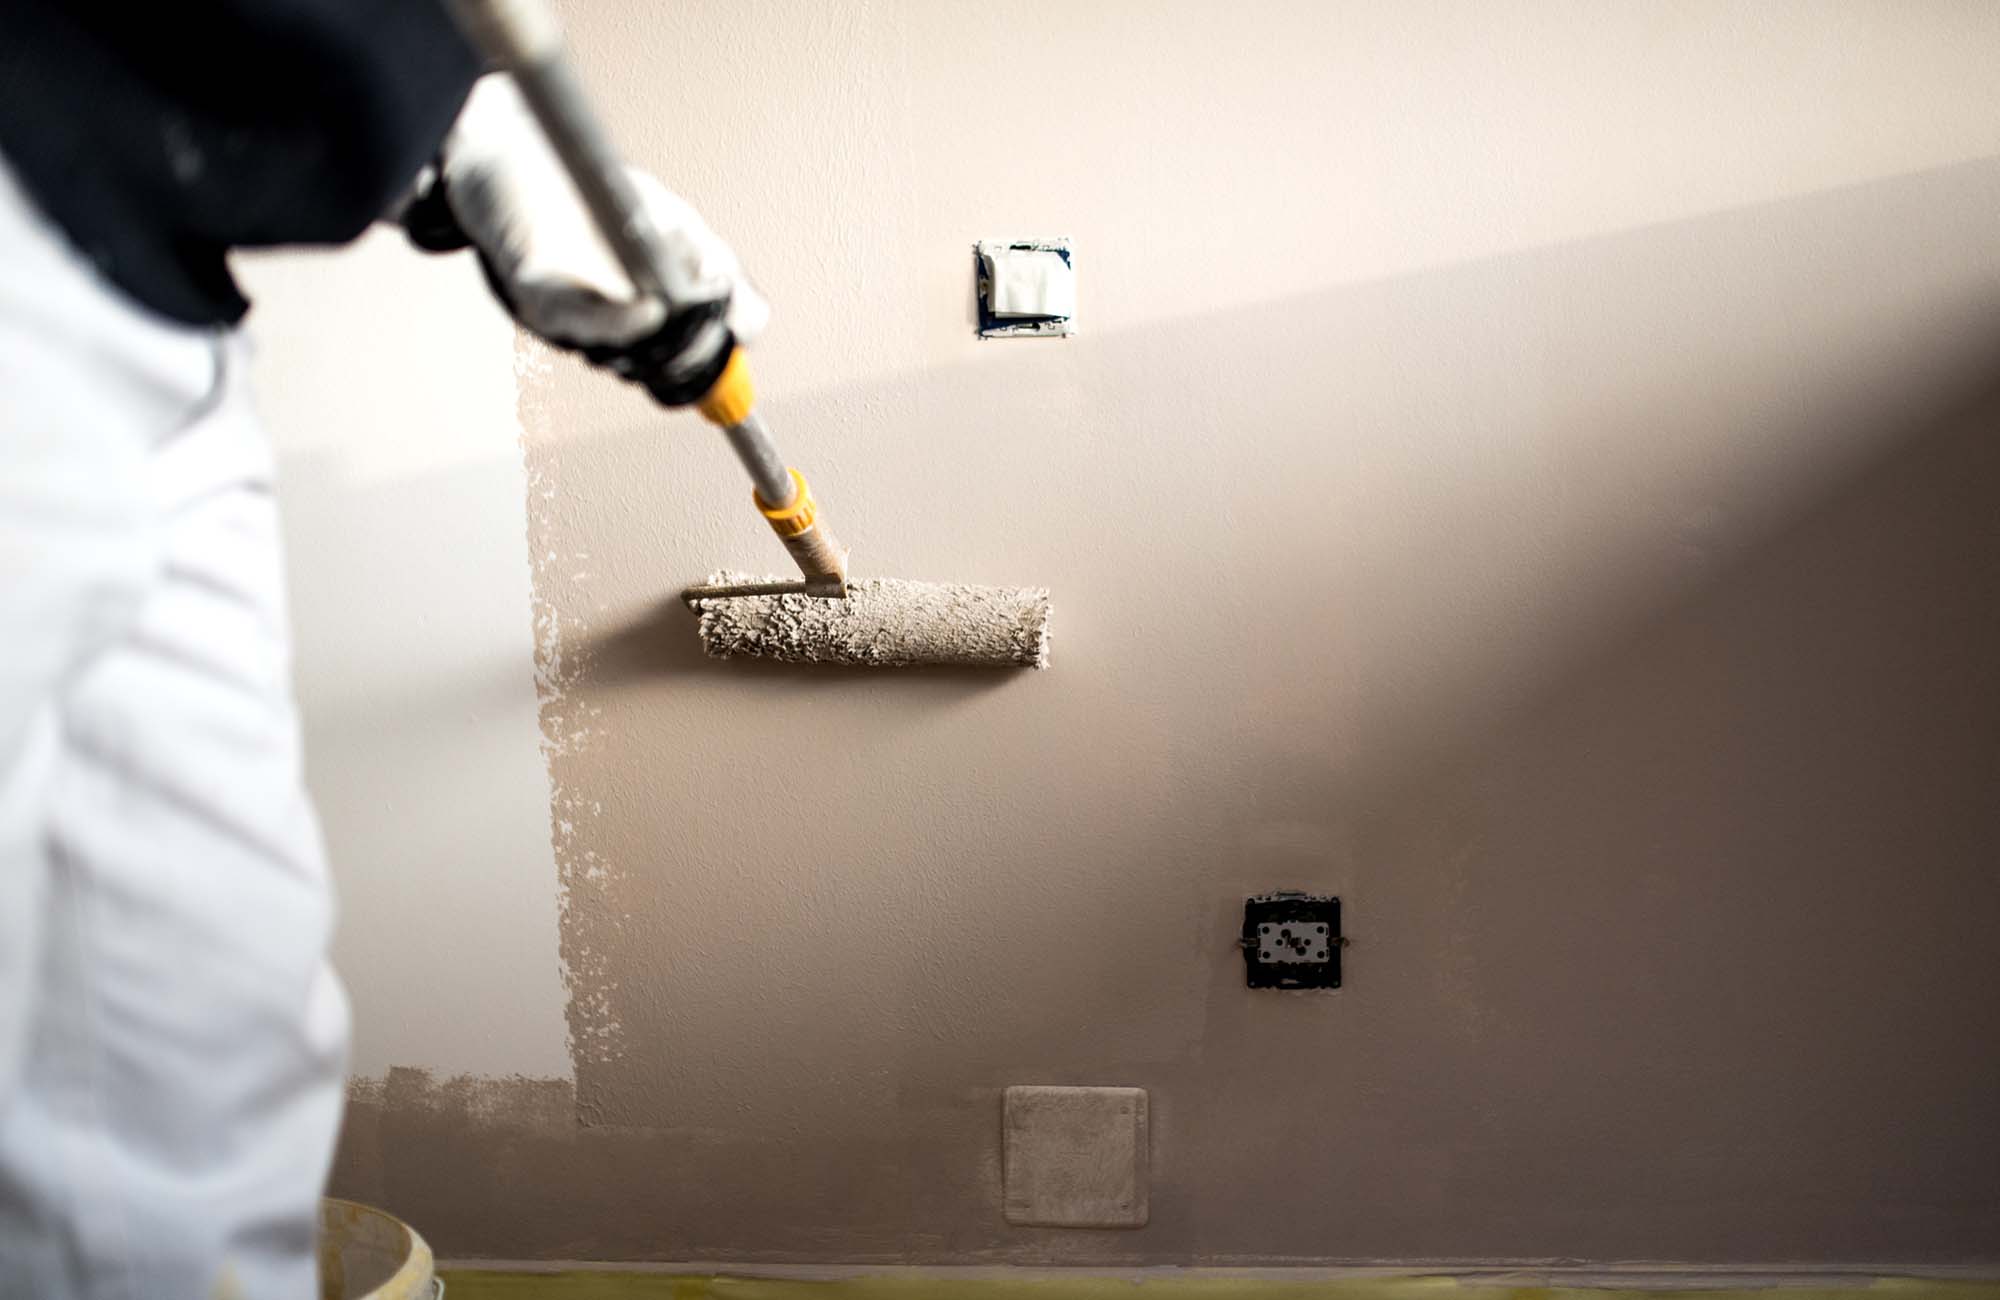 Handy man decorating walls with paint. Construction plaster worker painting and renovating with professional tools